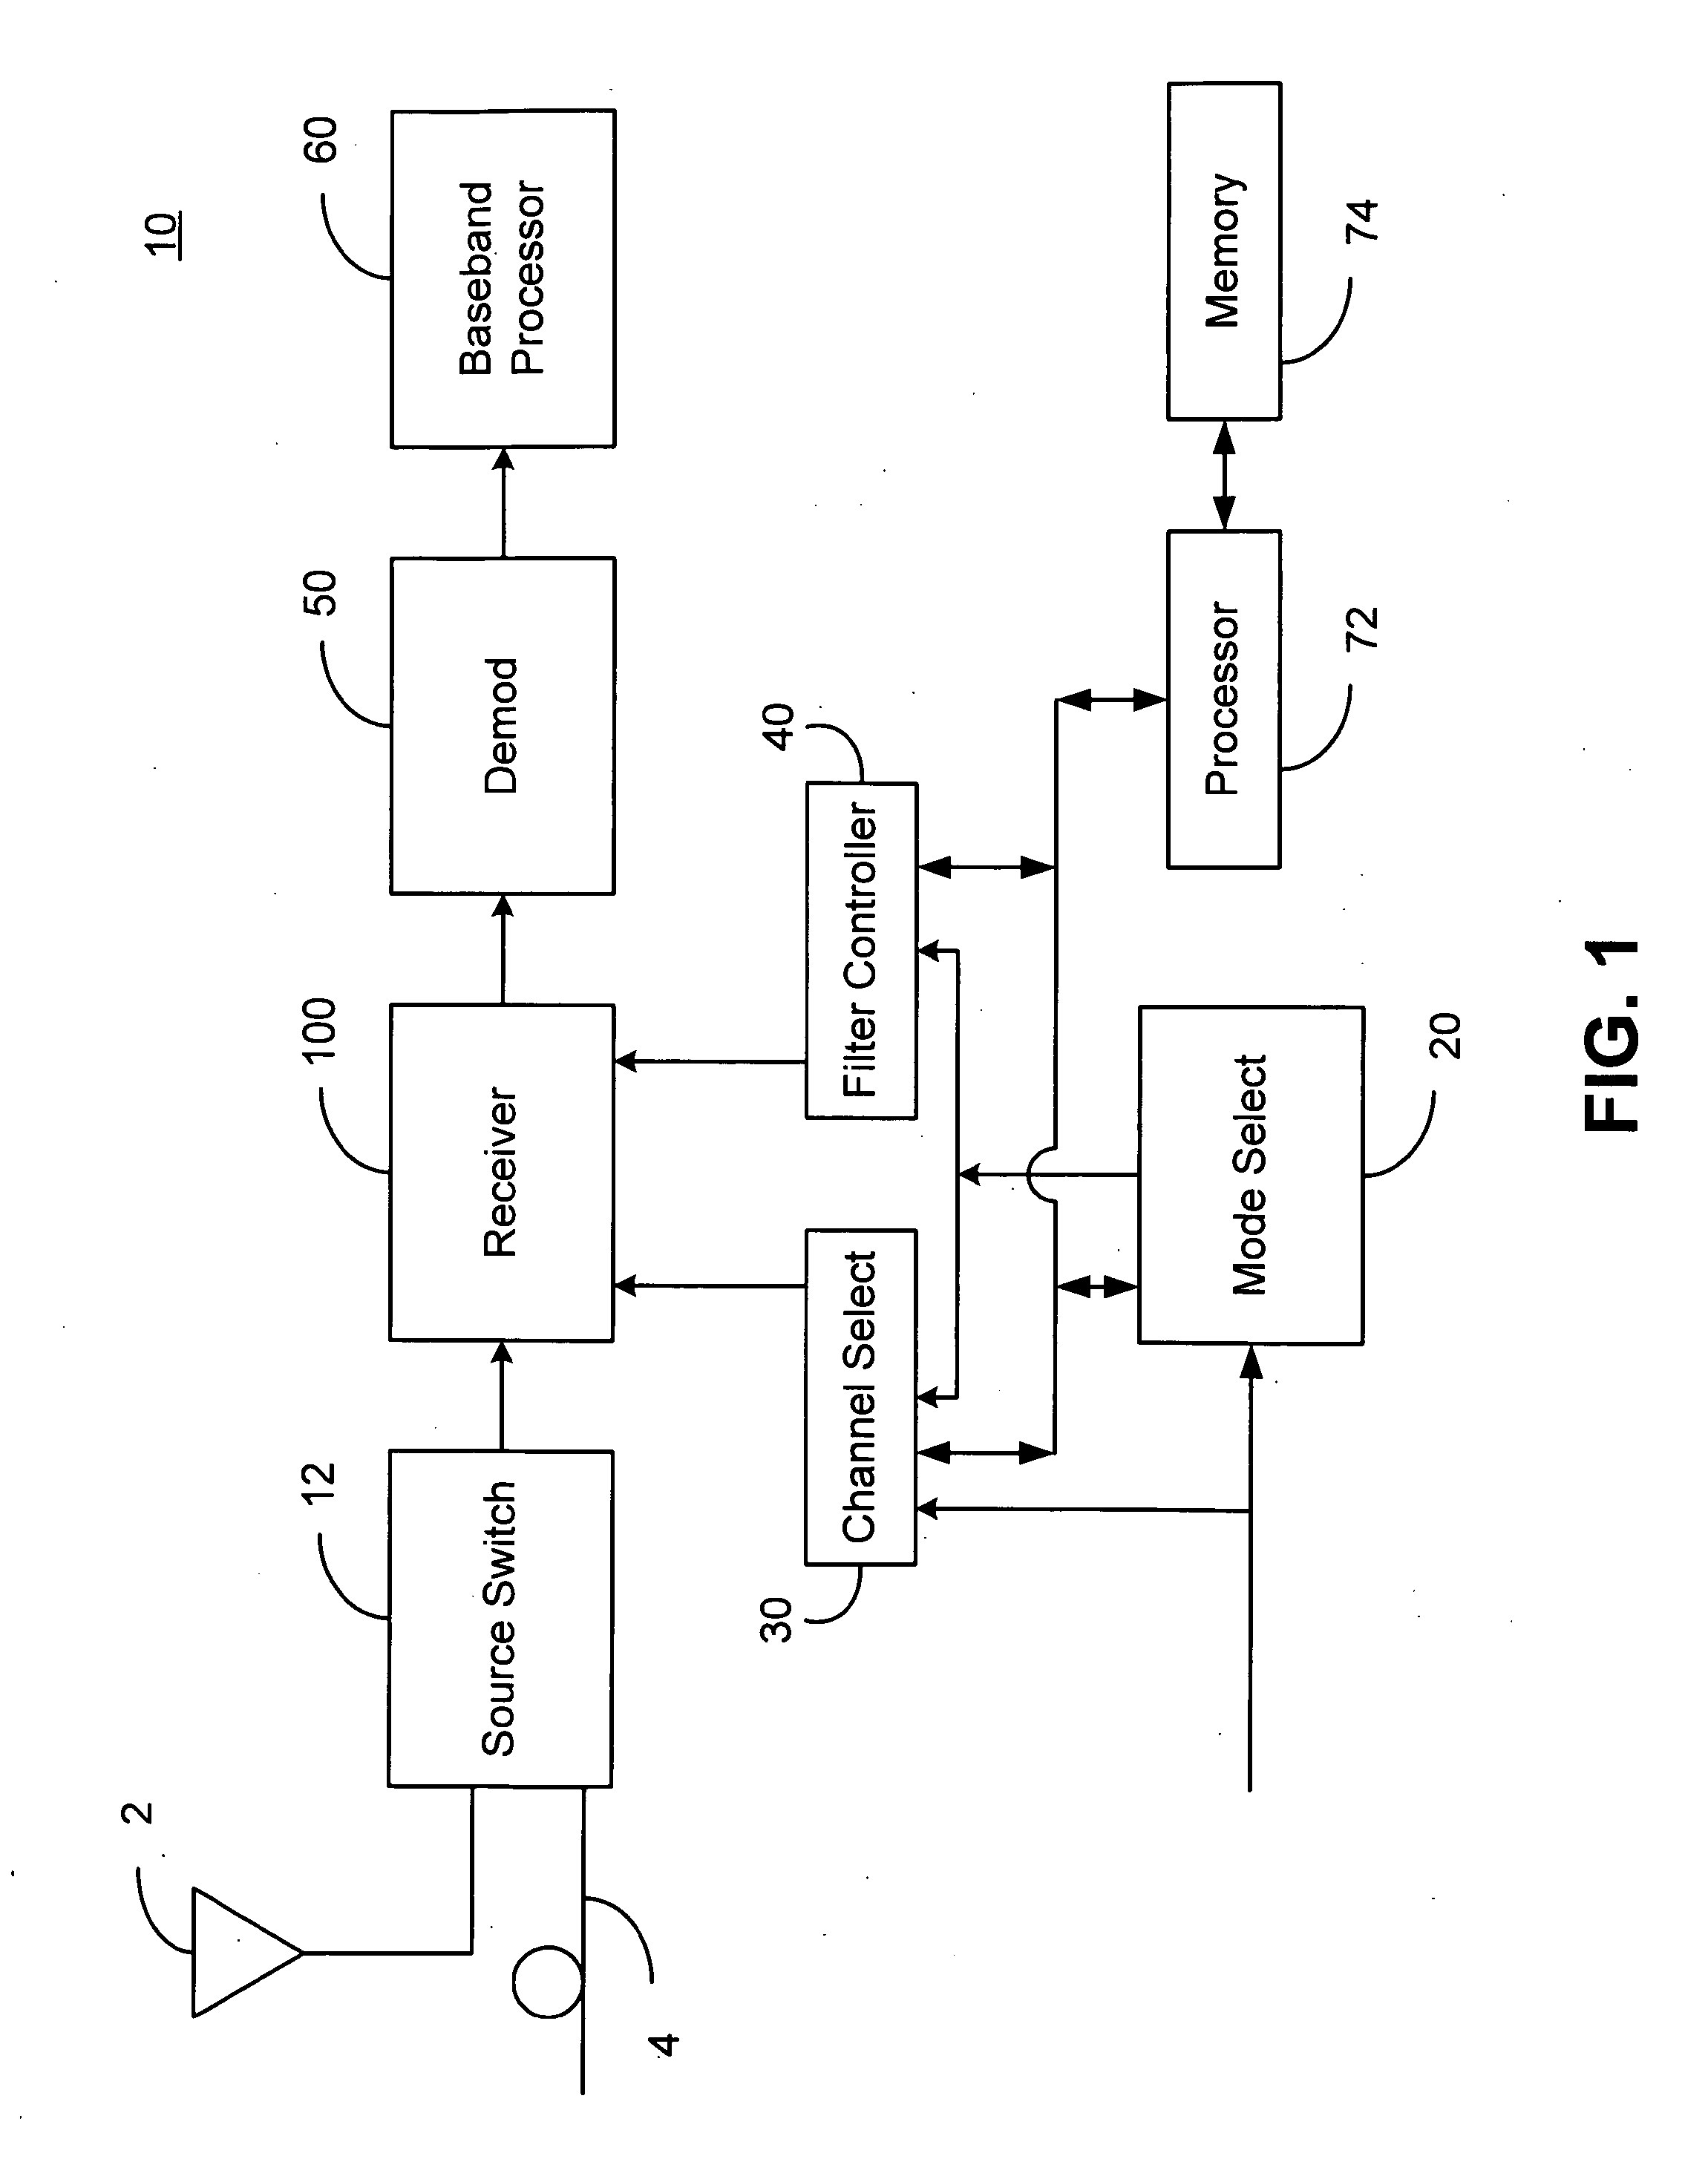 Harmonic Reject Receiver Architecture and Mixer